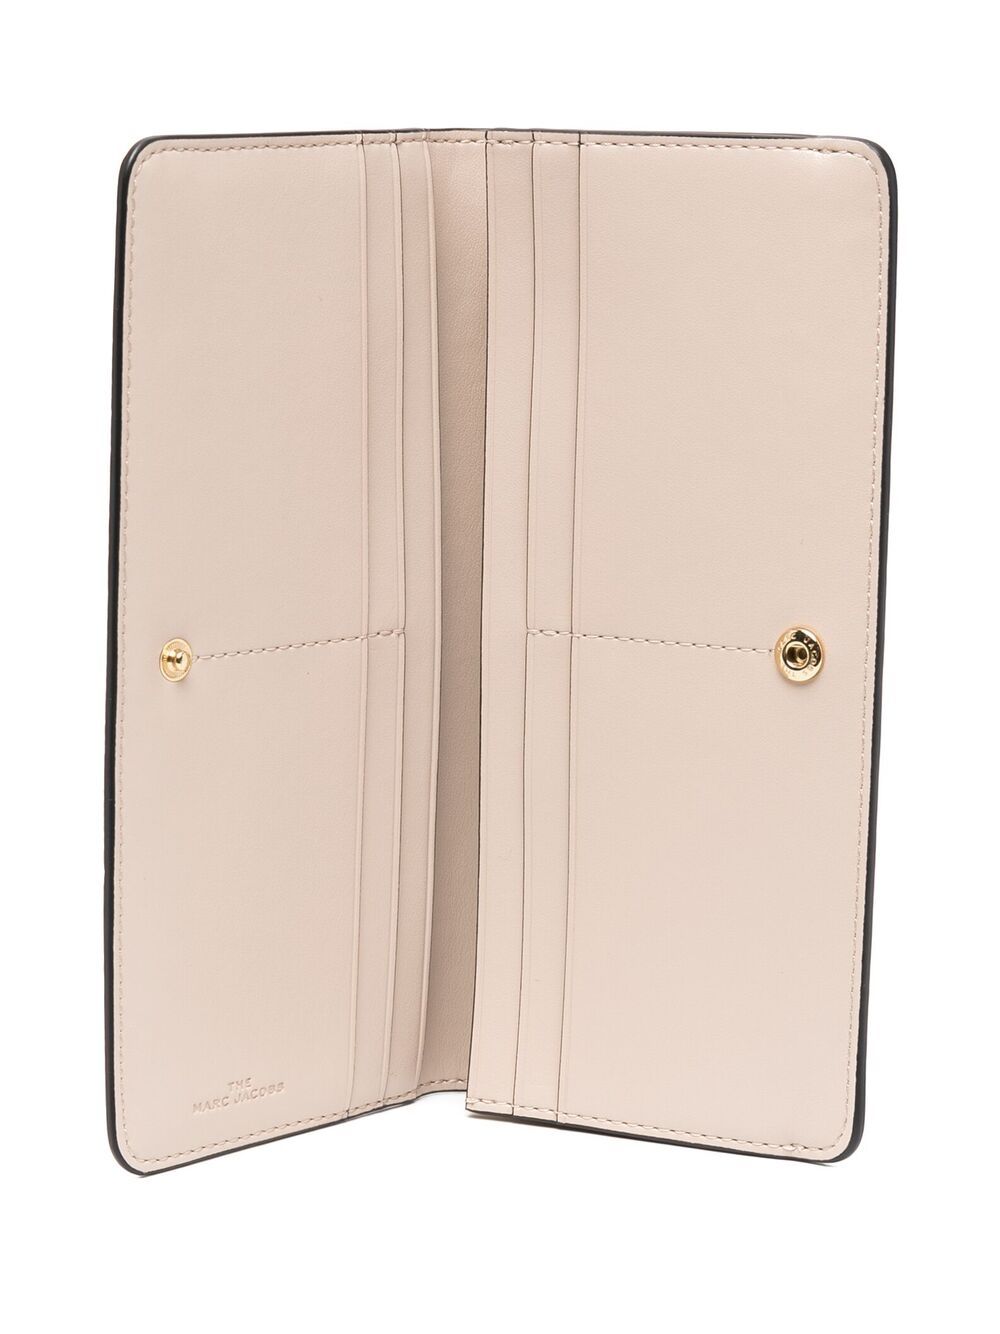 Marc Jacobs Bold Open Face Leather Wallet - Farfetch